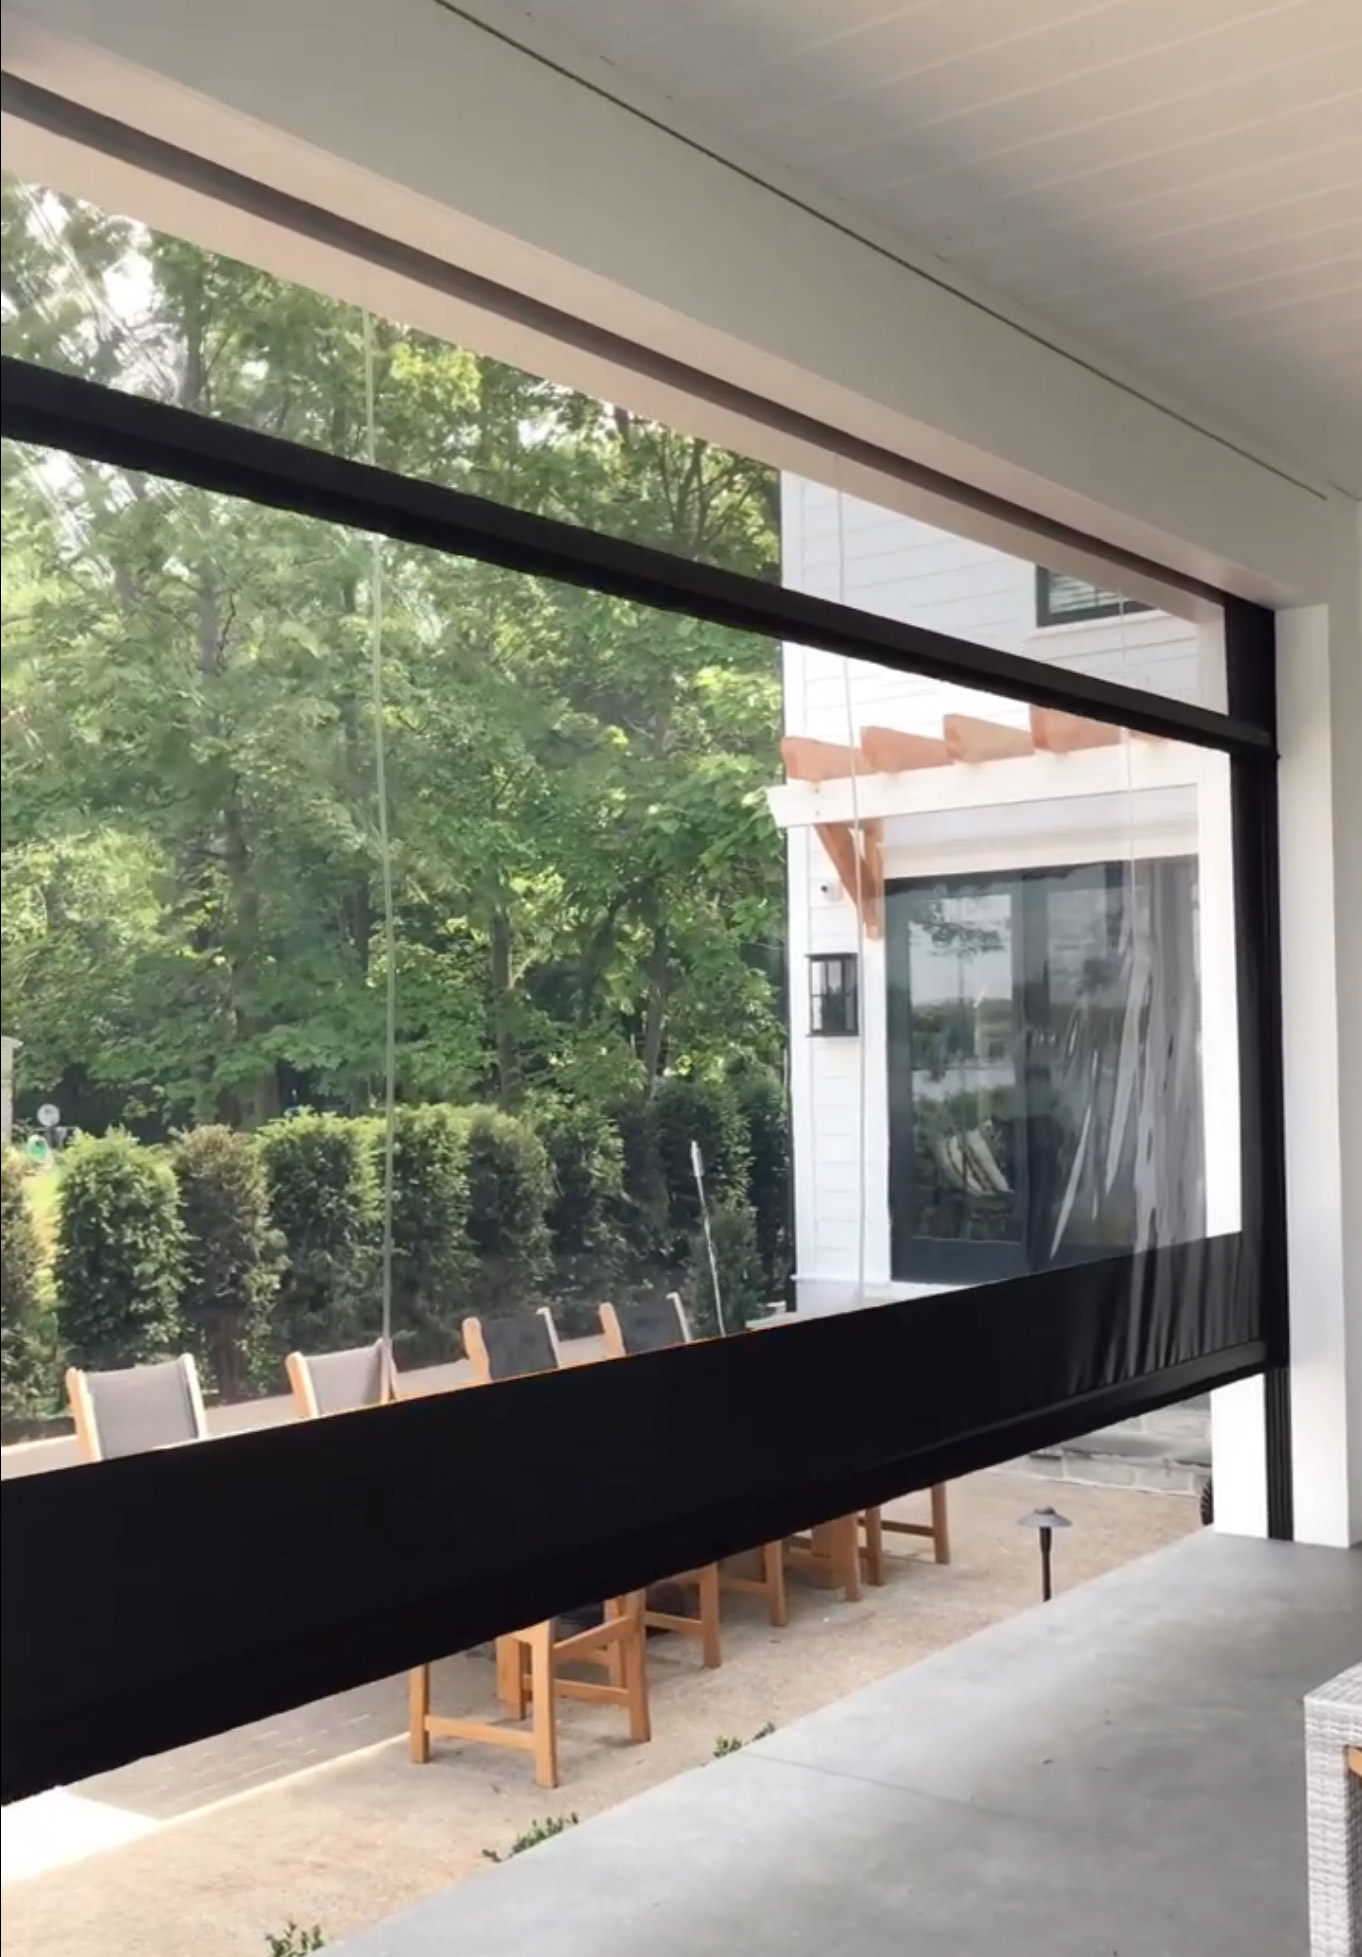 Power Screens Automatically Screen-In Your Patio With The Push of a Button - Automatic power patio screens